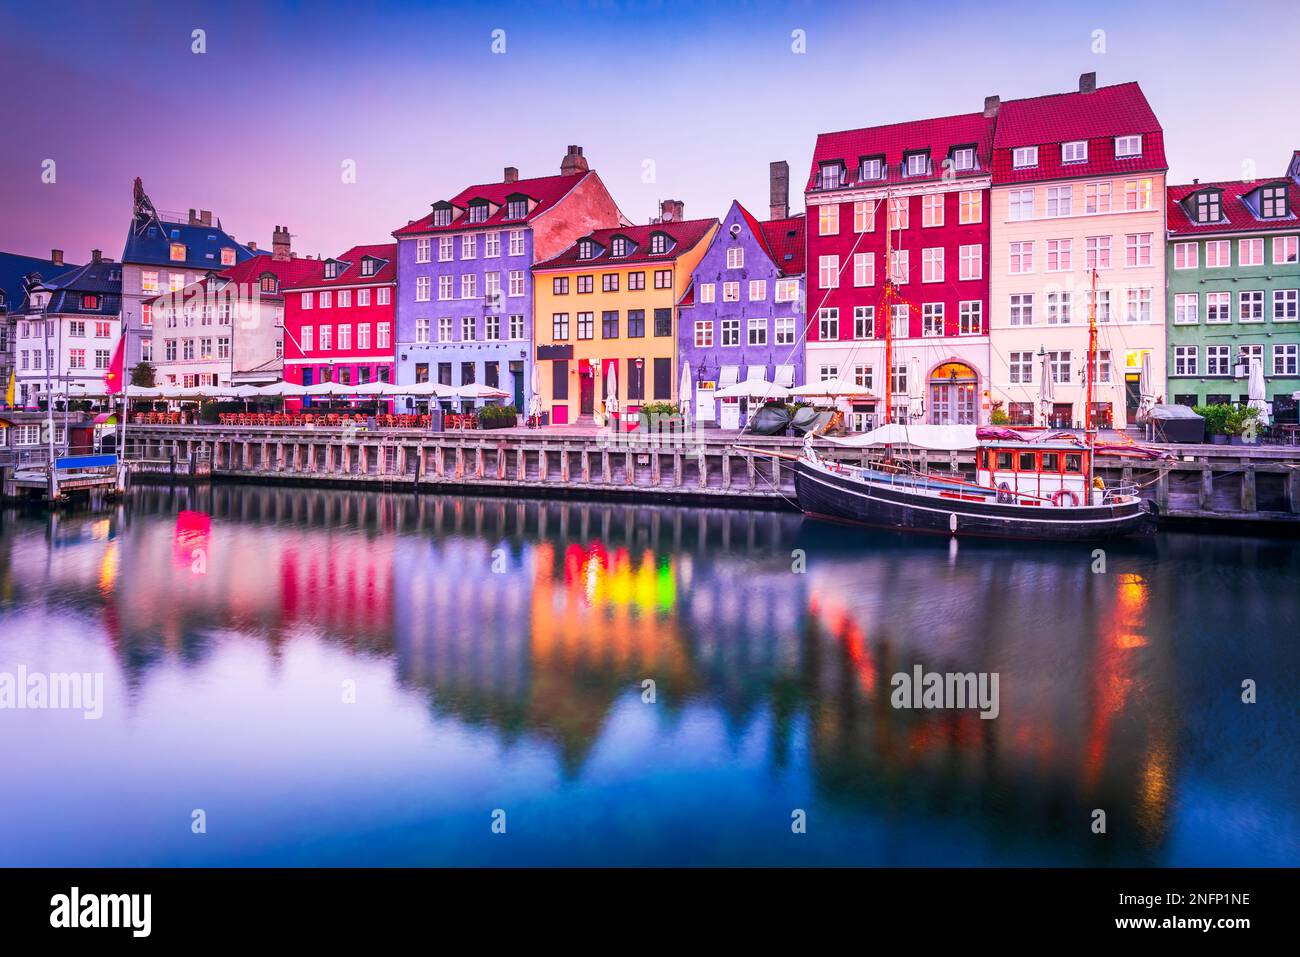 Kobenhavn, Denmark. Nyhavn, Copenhagen's iconic canal, reflects colorful buildings and glowing streetlights at twilight, creating a picturesque touris Stock Photo